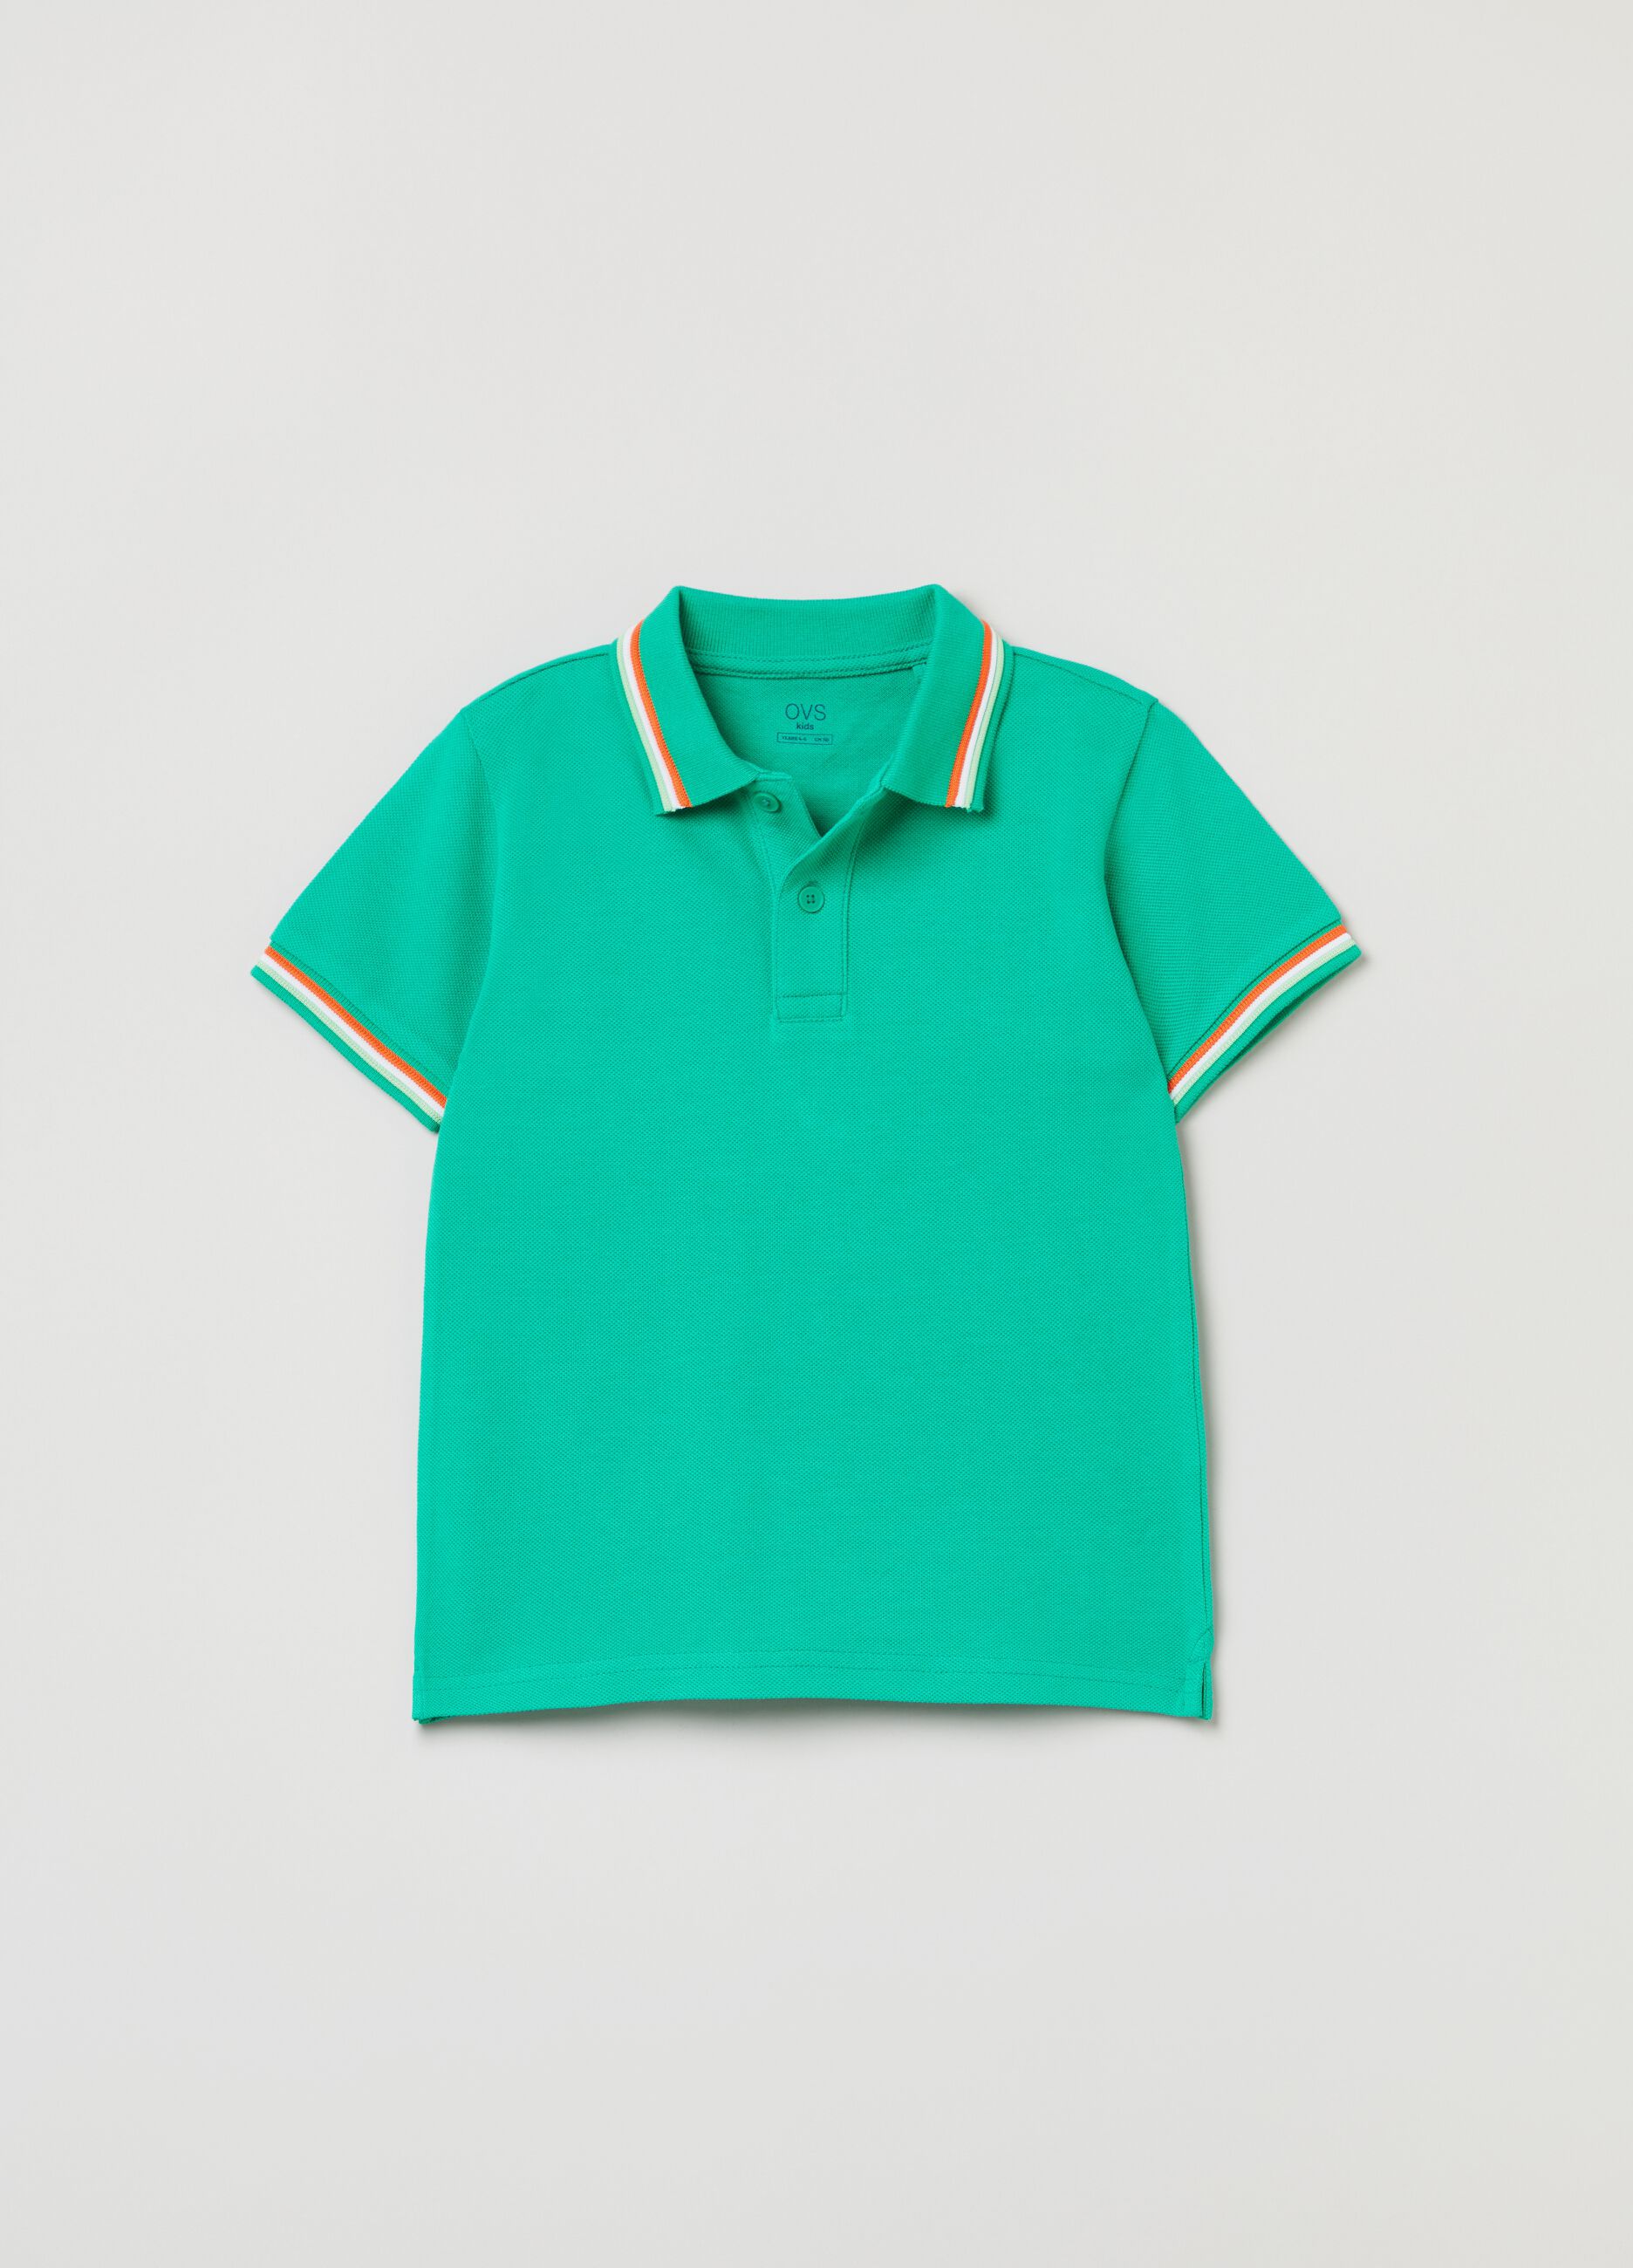 Polo shirt in cotton piquet with striped trims